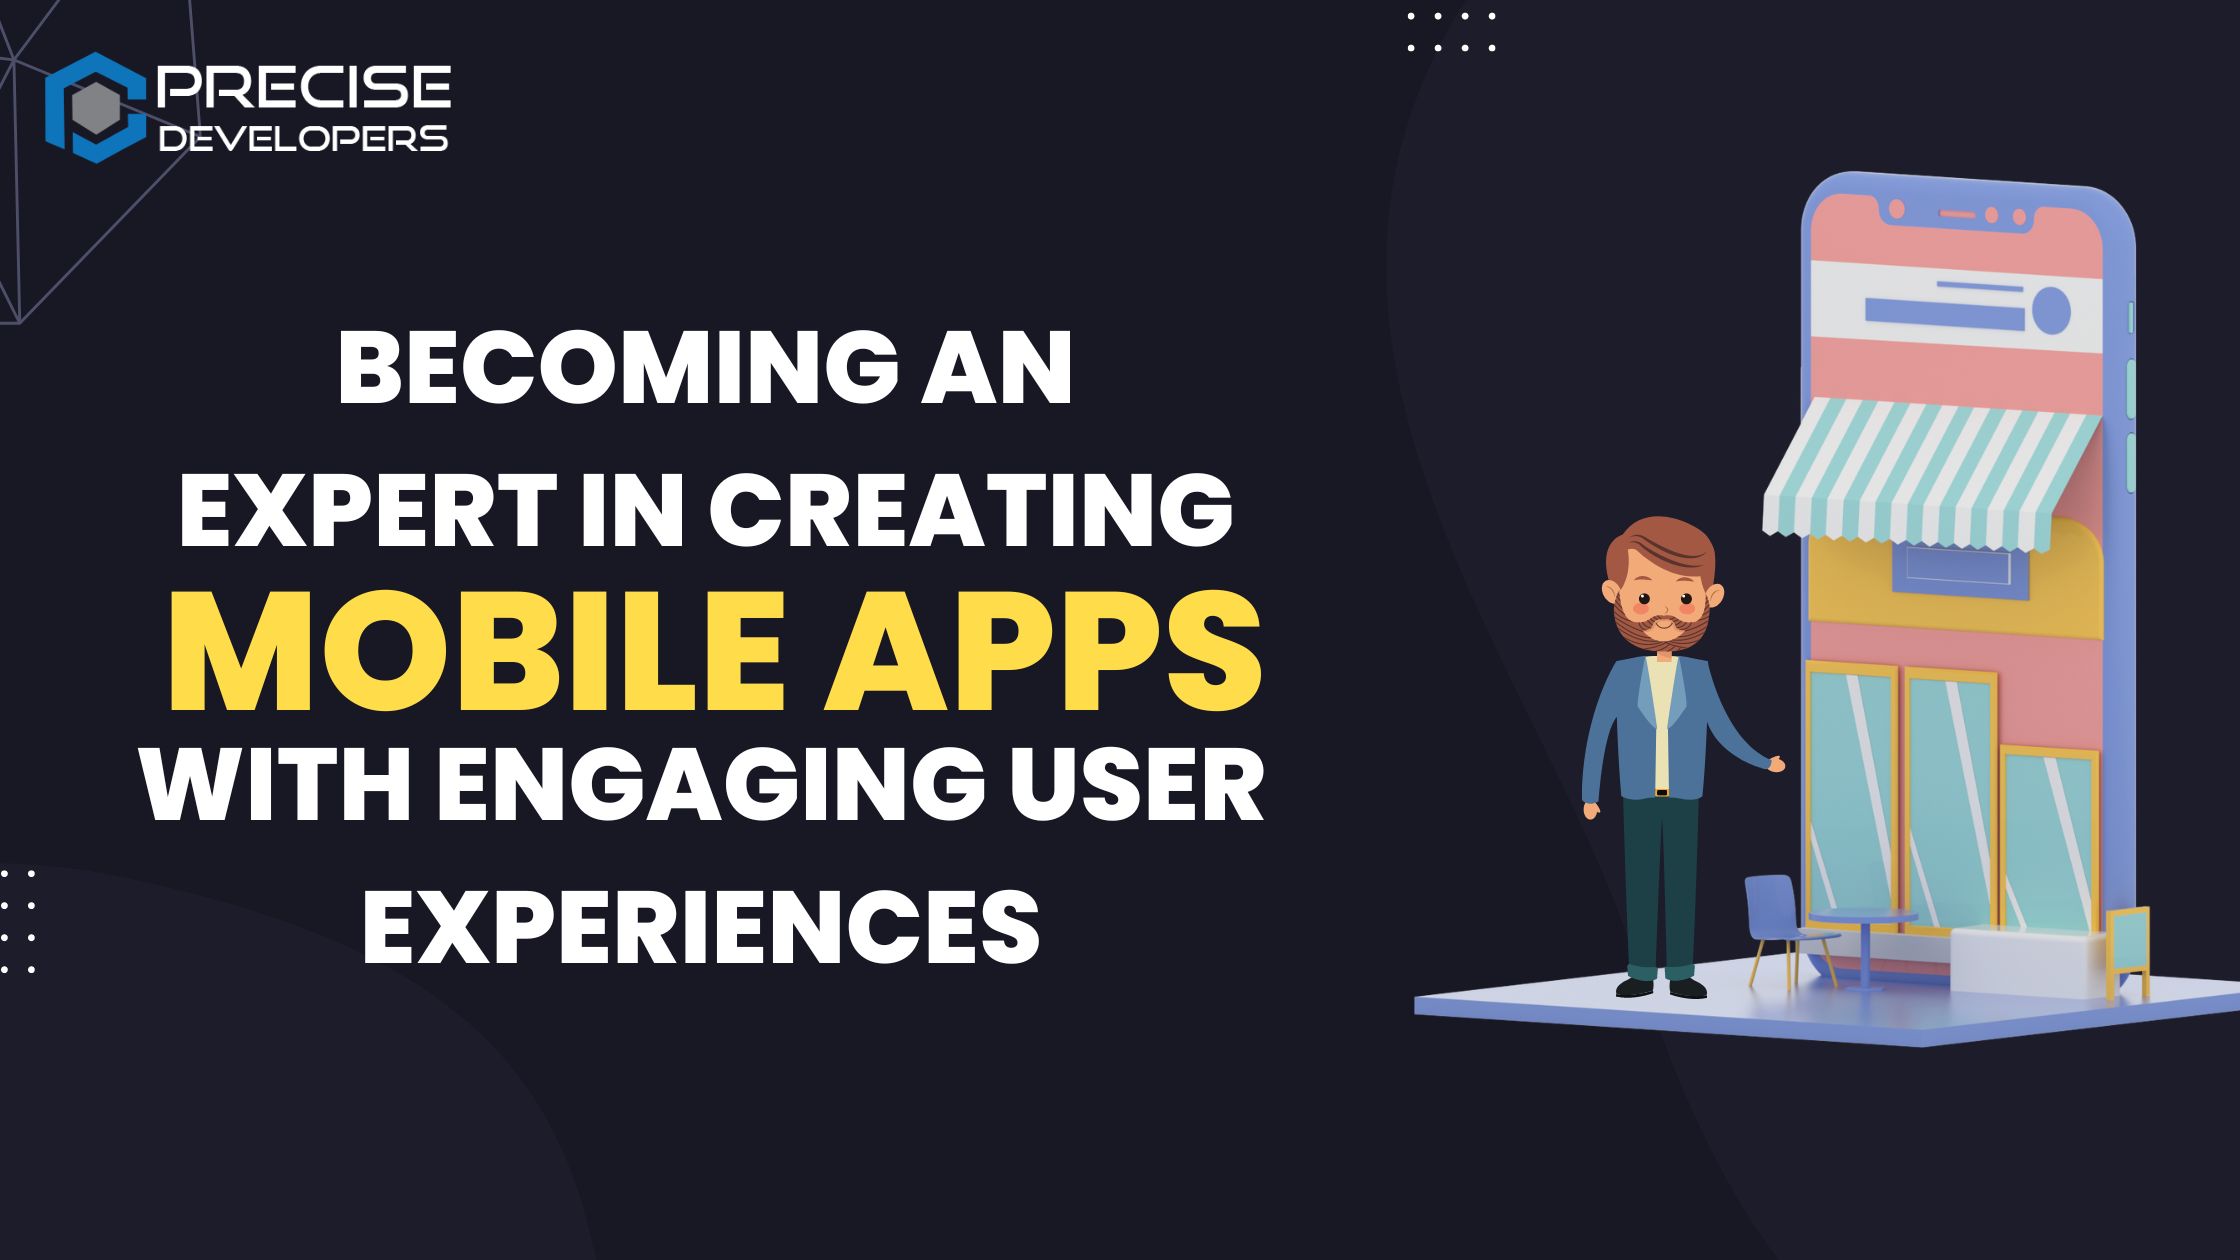 Becoming an Expert in Creating Mobile Apps with Engaging User Experiences 123